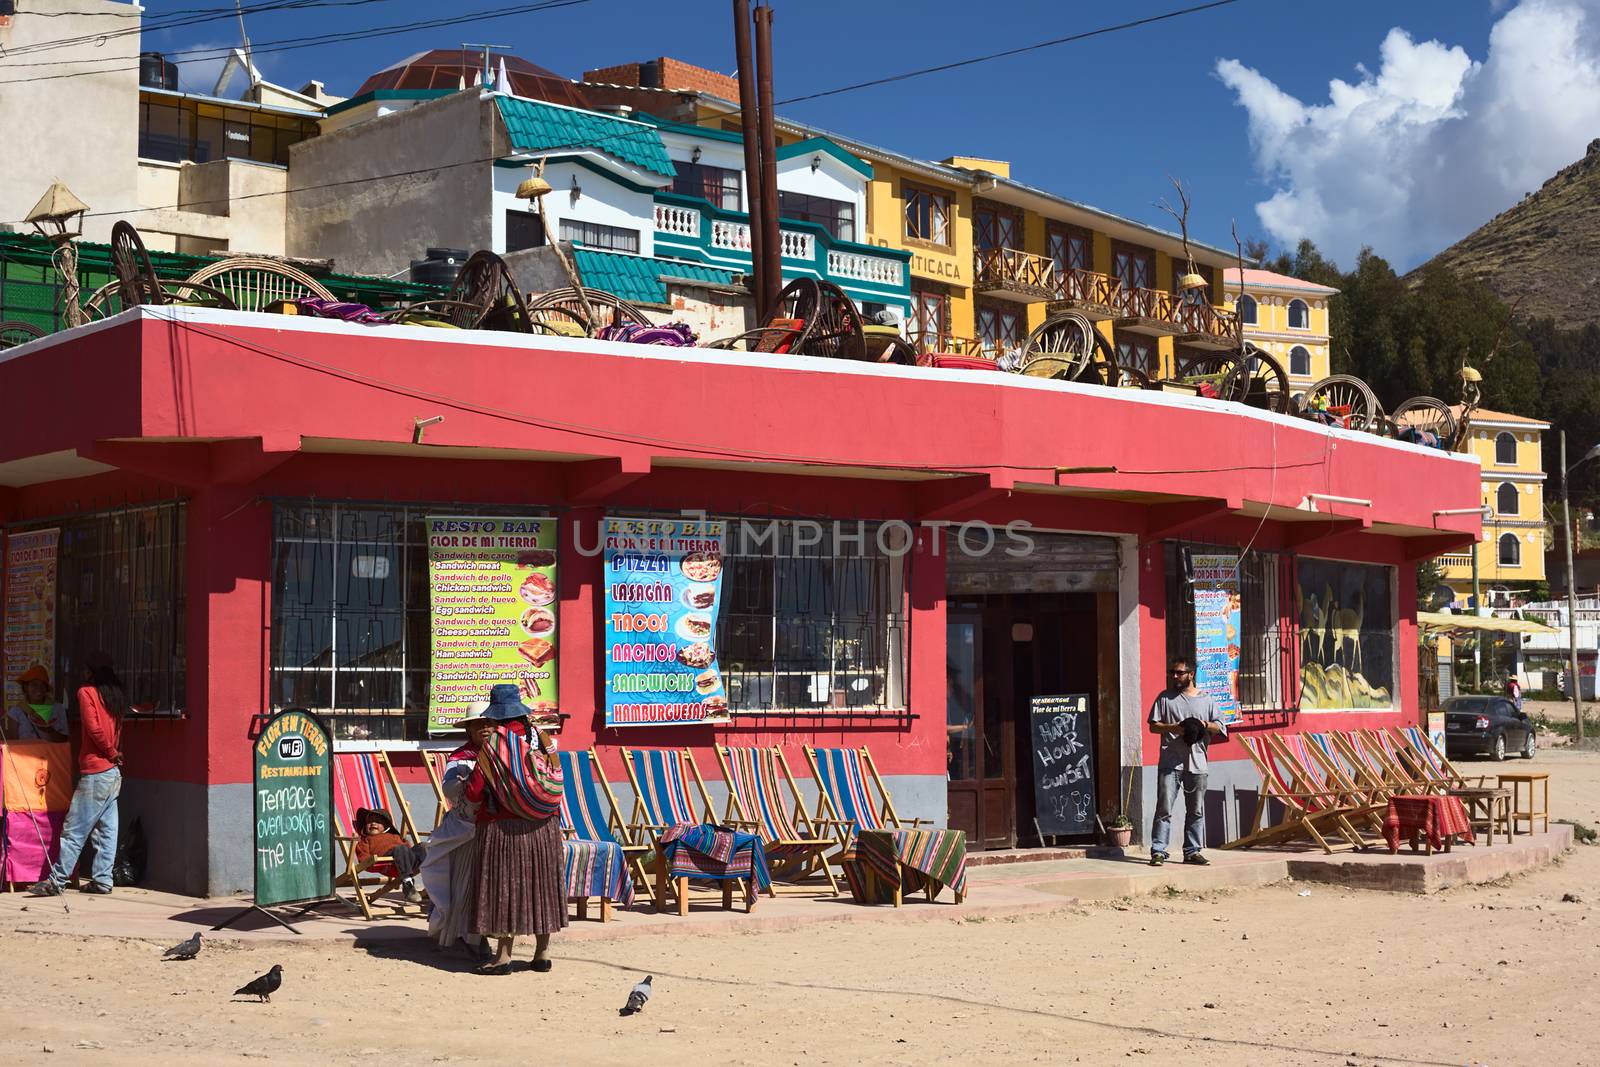 COPACABANA, BOLIVIA - OCTOBER 19, 2014: Unidentified people standing in front of the resto bar Flor de Mi Tierra on the corner of the avenues 6 de Agosto and Costanera along the shore of Lake Titicaca in the small tourist town on October 19, 2014 in Copacabana, Bolivia